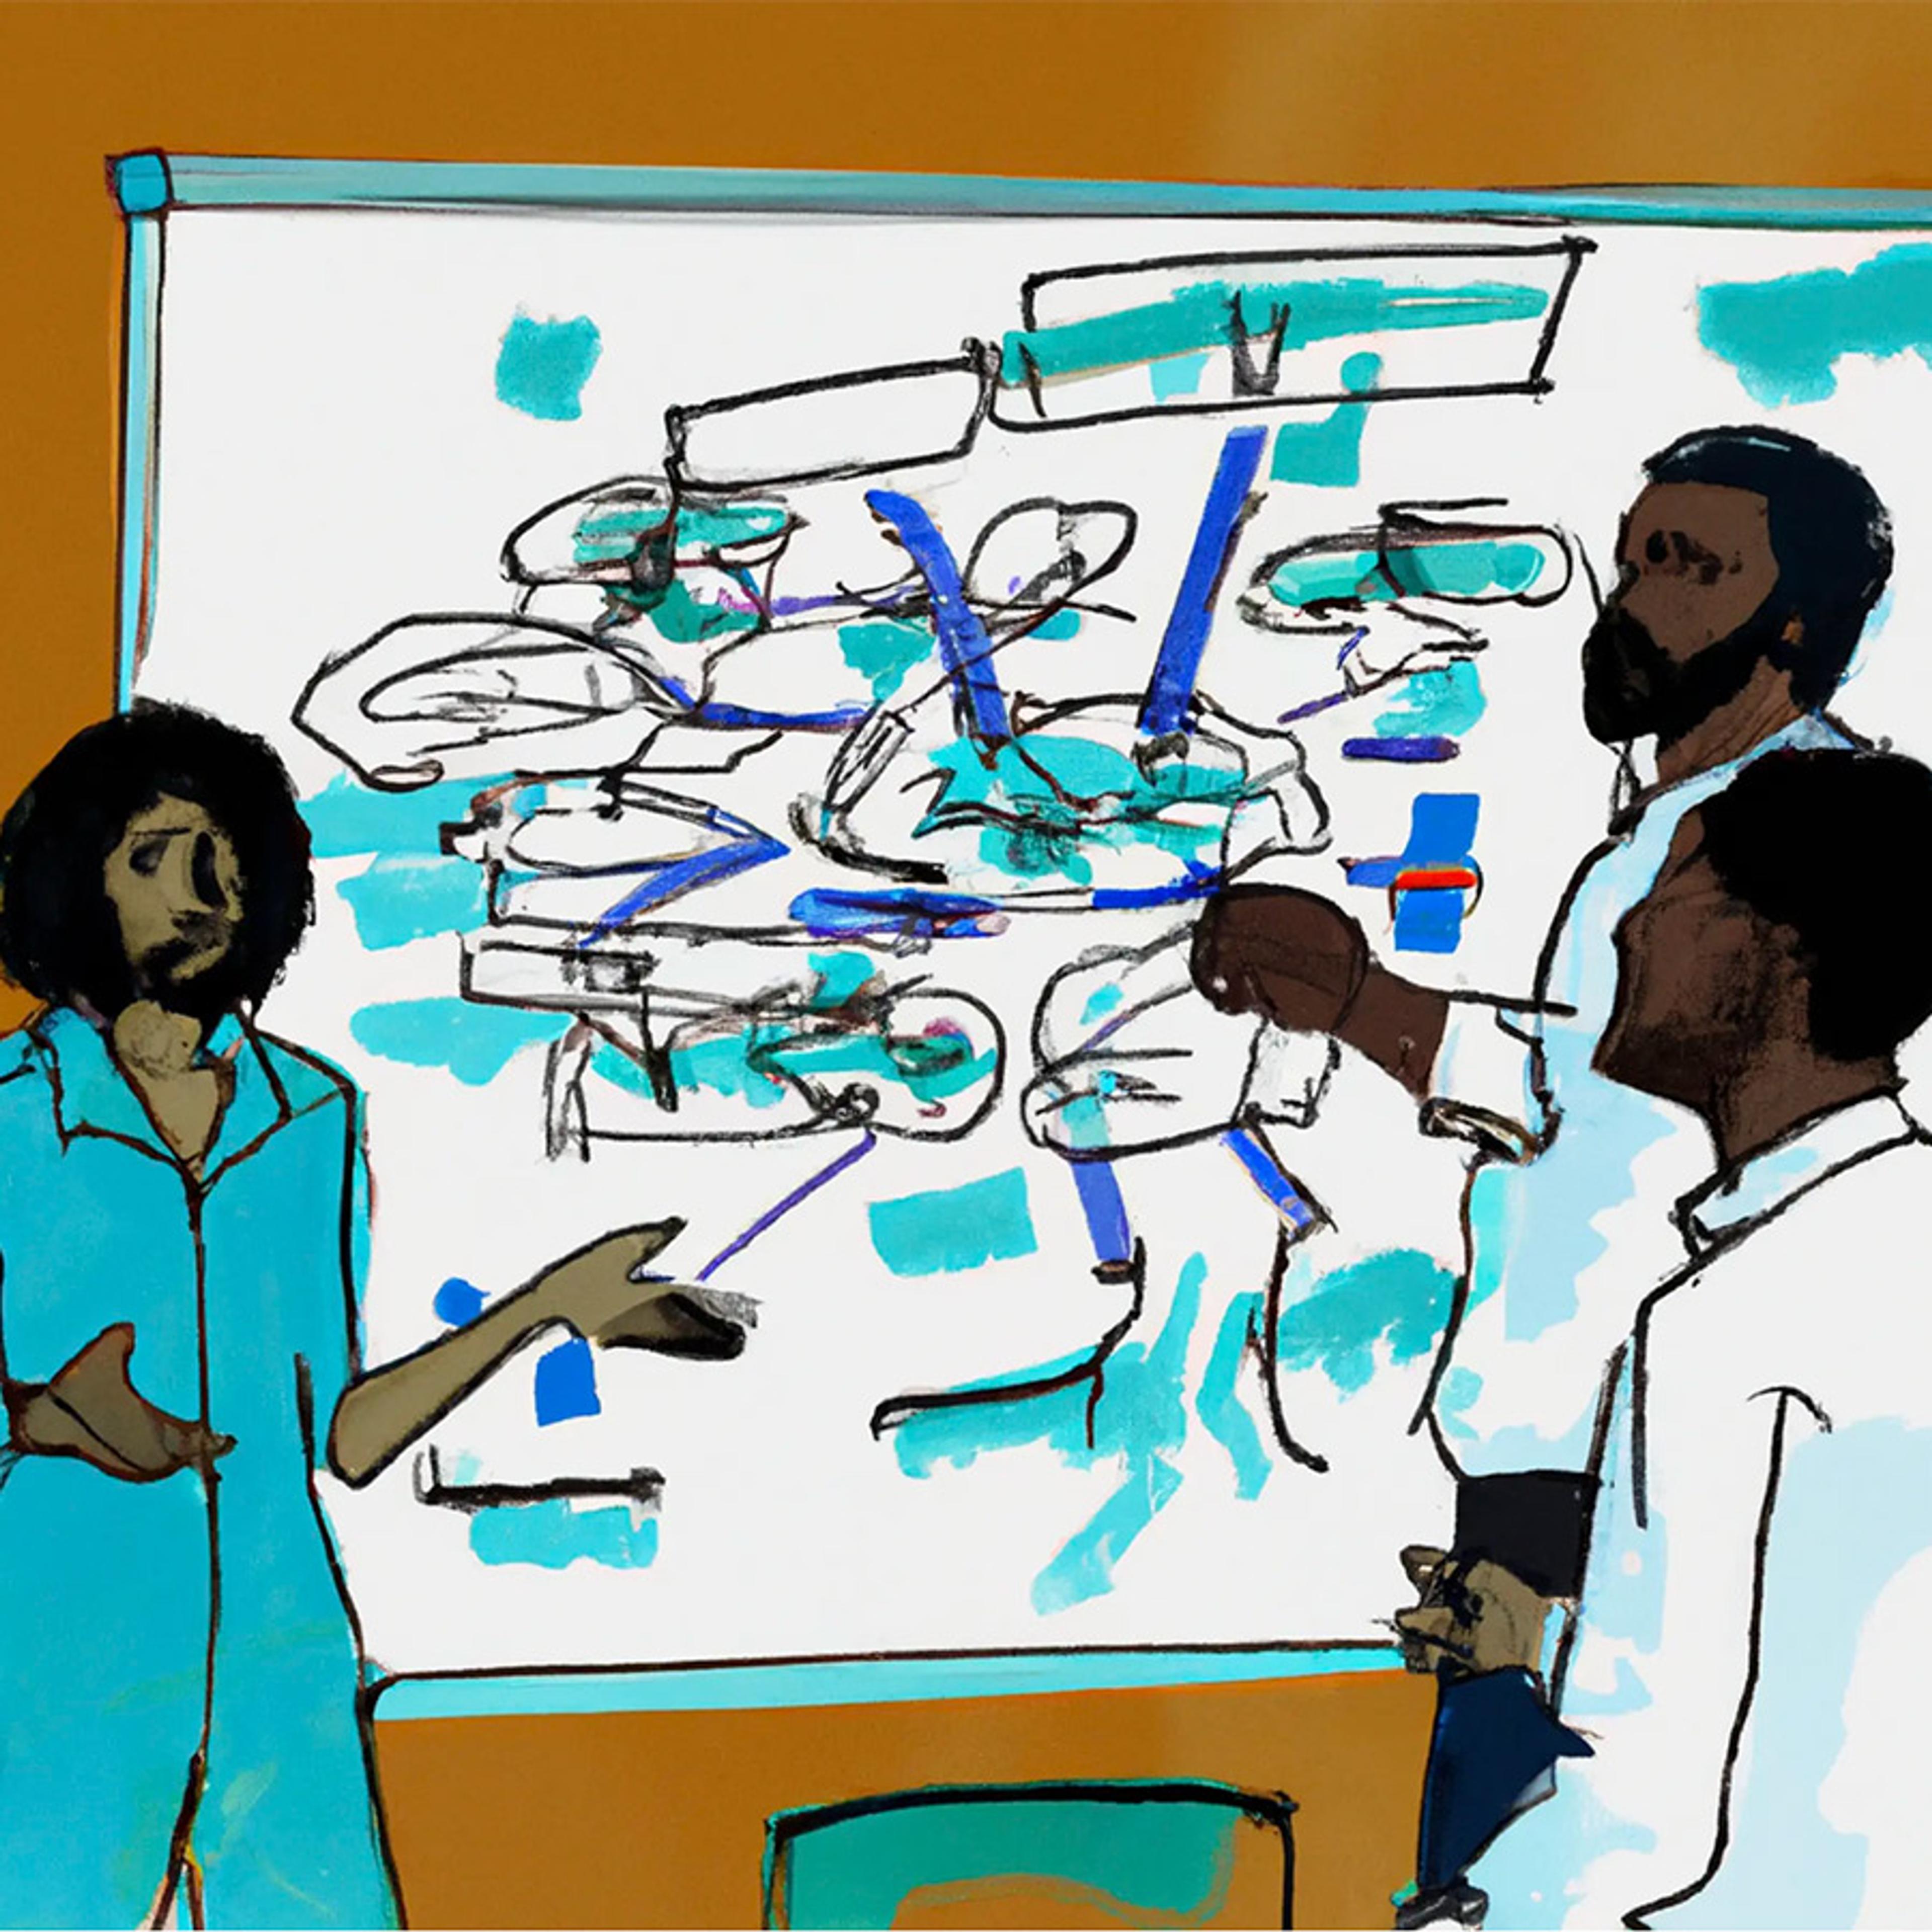 abstract art painting of a group of software engineers, in a meeting room from the 90s, proposing solutions to a complex problem on a whiteboard